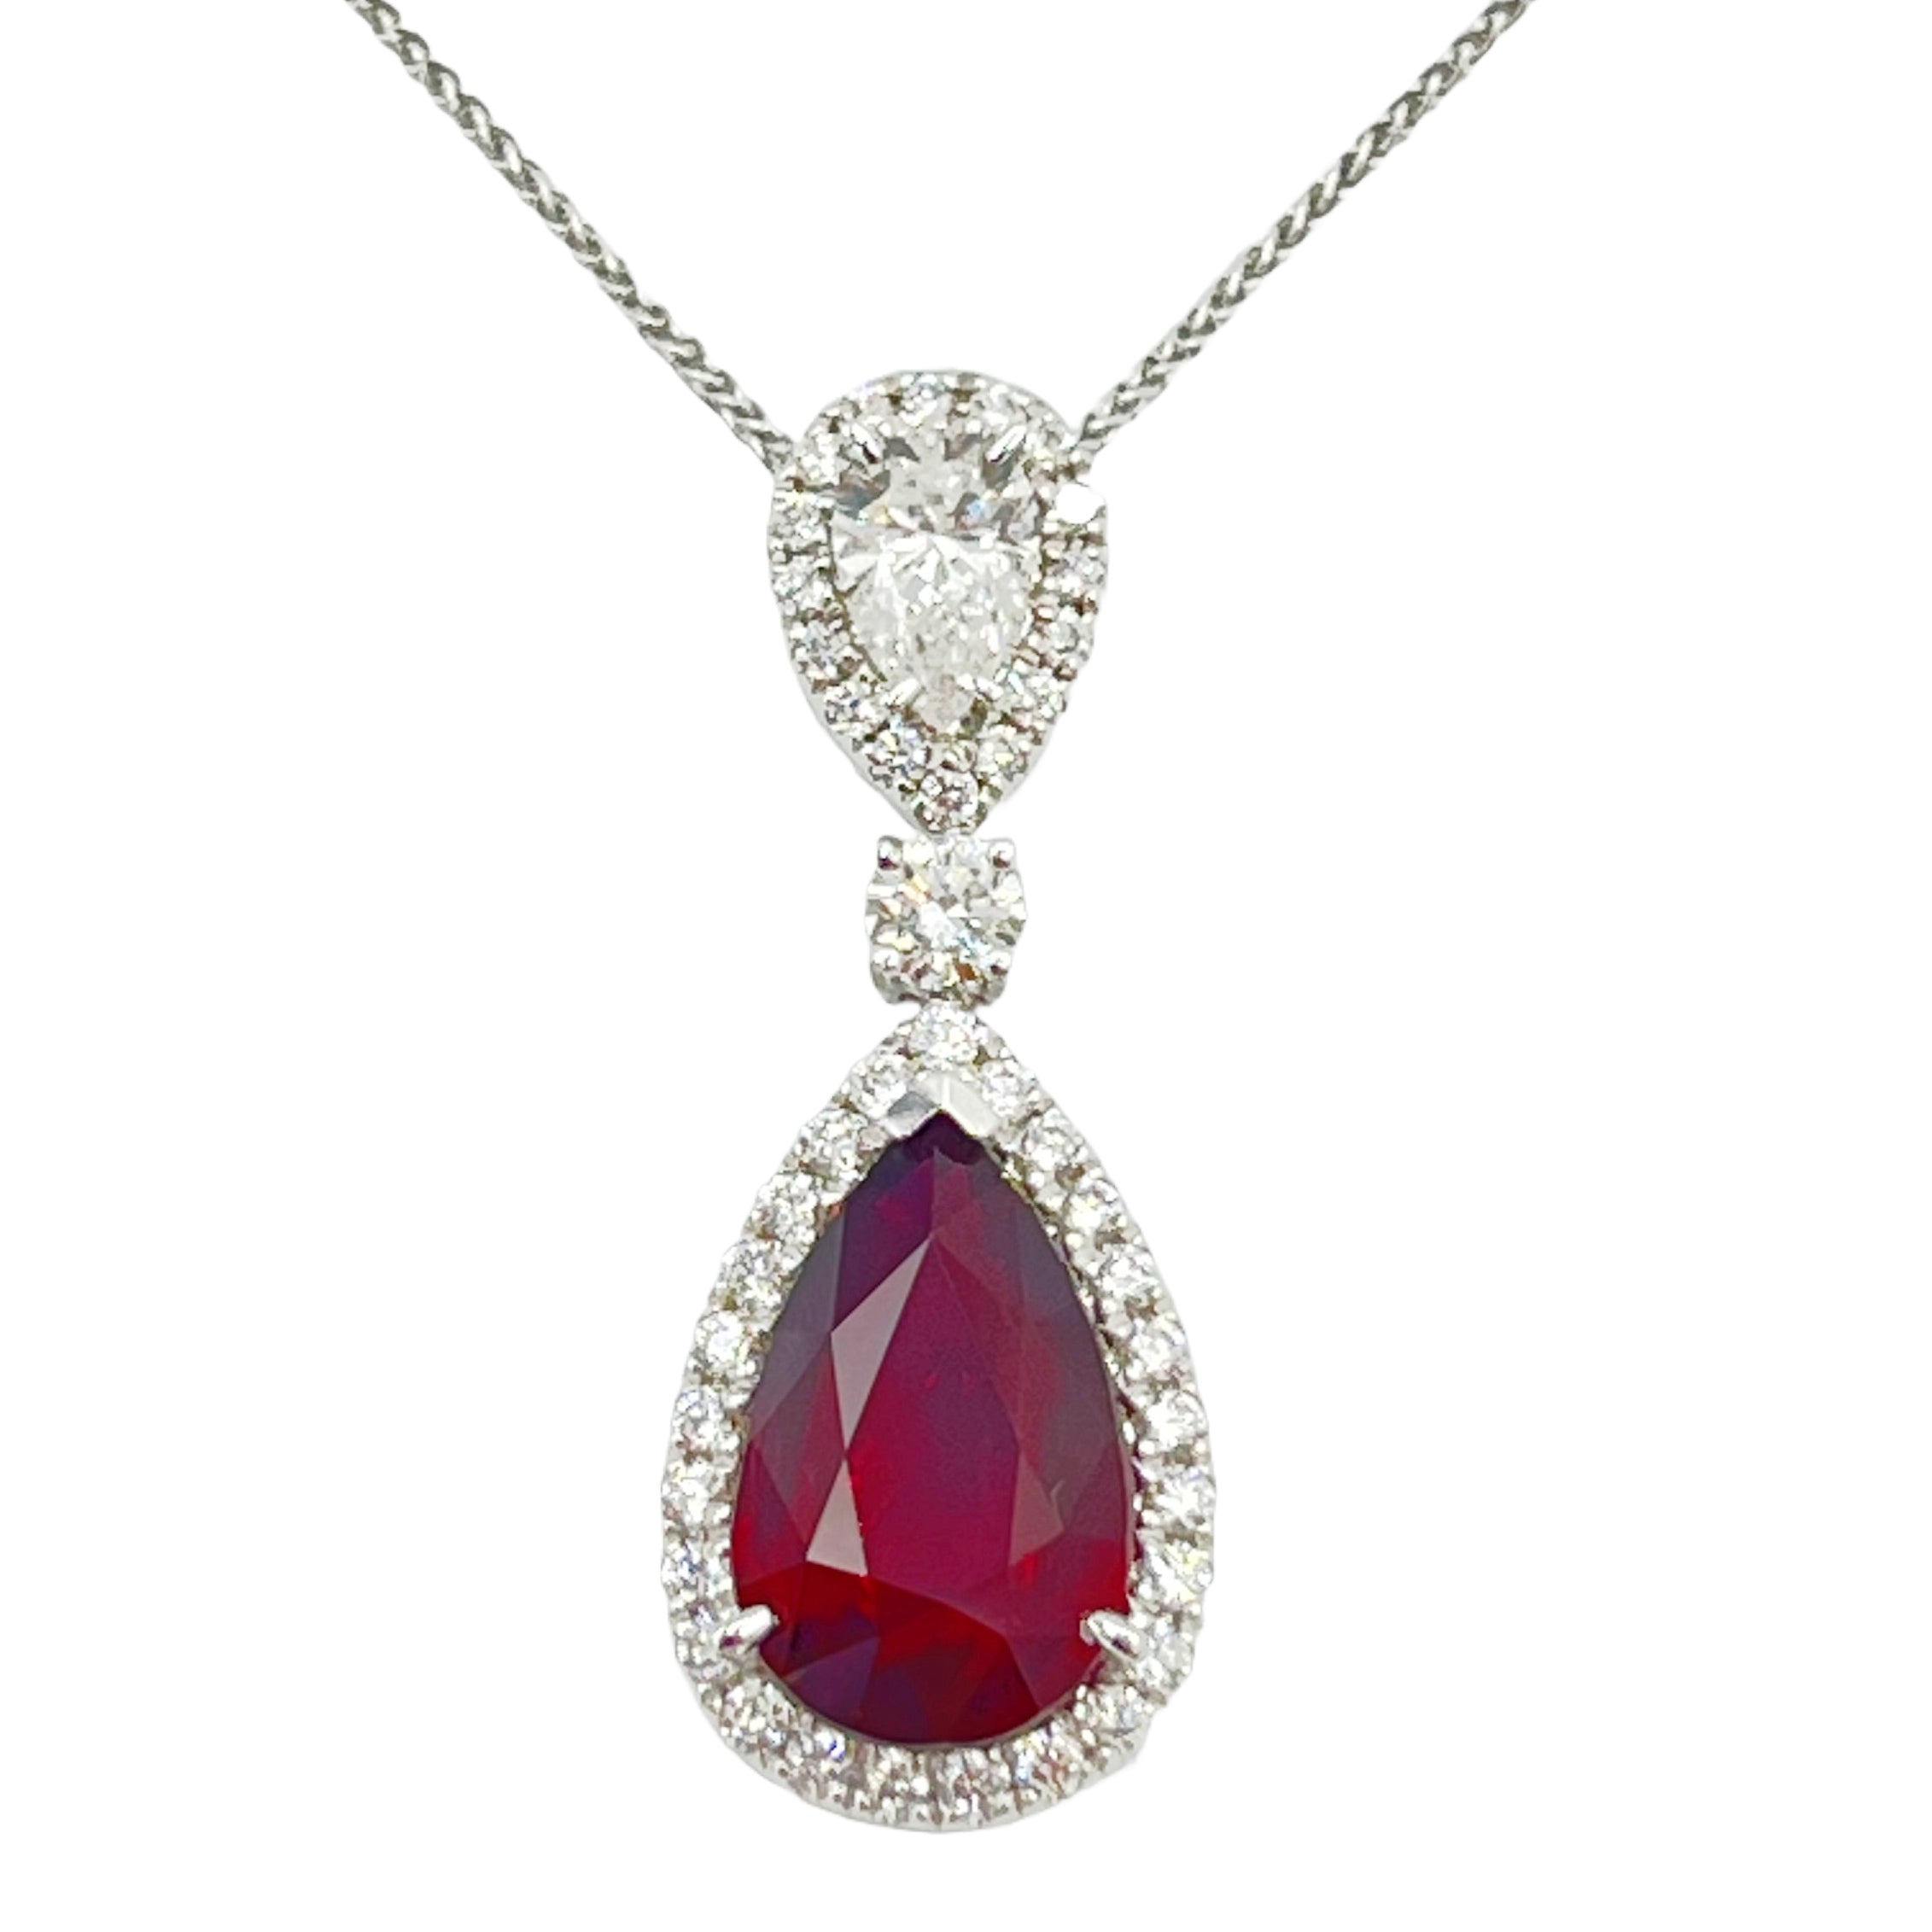 Pendant/18KW/3.2G 1RUBY-4.16CT 1PR-0.40CT 43RD-0.48CT GIA2221516486